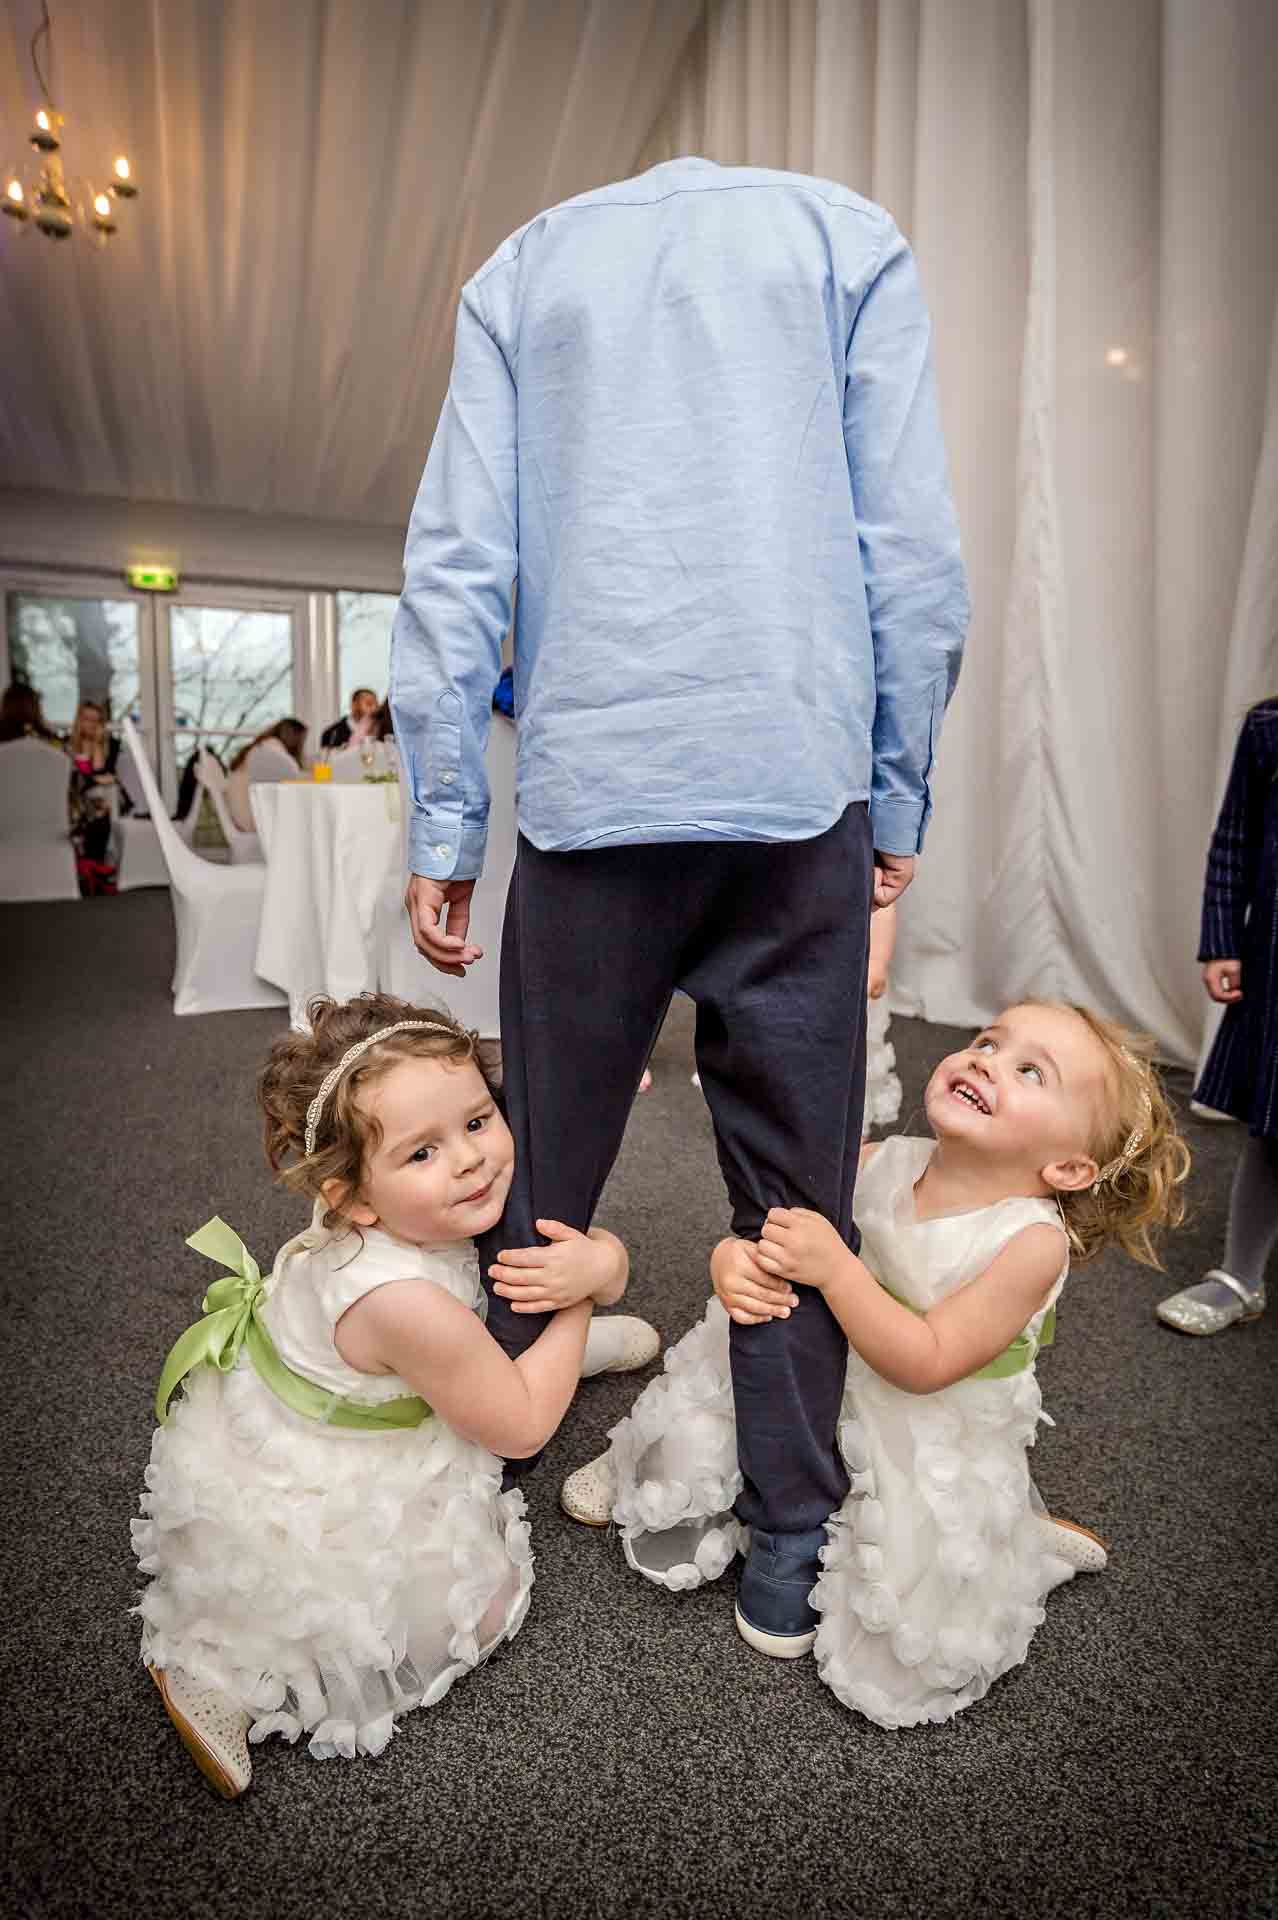 Two young bridesmaids cling on to leg of boy at wedding